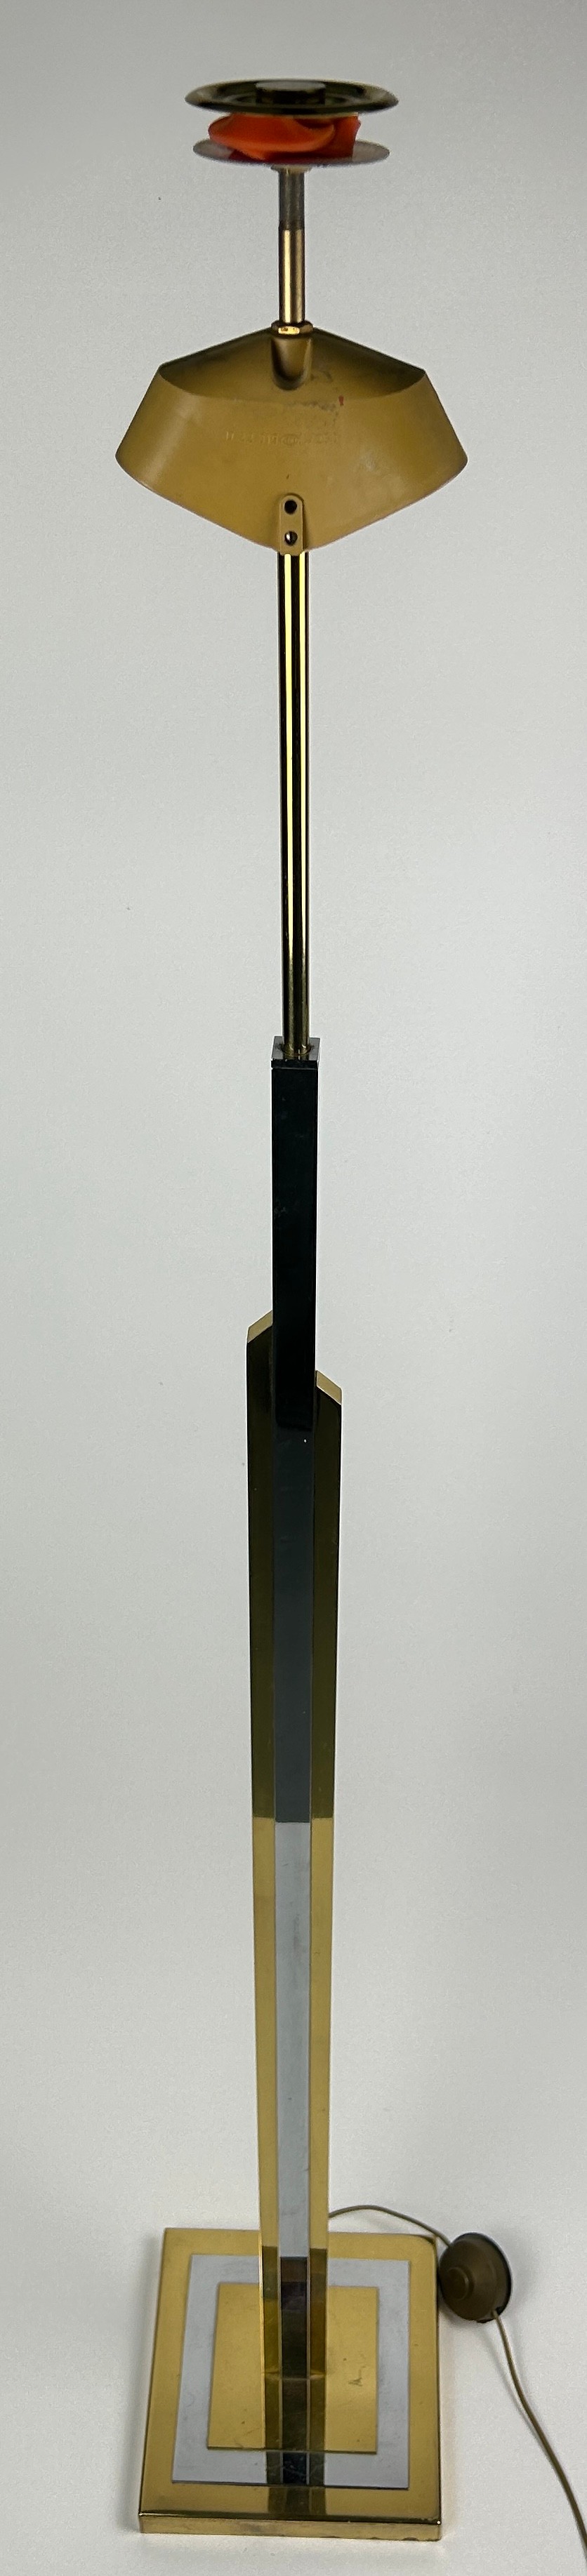 AN ATTRIBUTED TO WILLY RIZZO SKYSCRAPER FLOOR STANDING LAMP